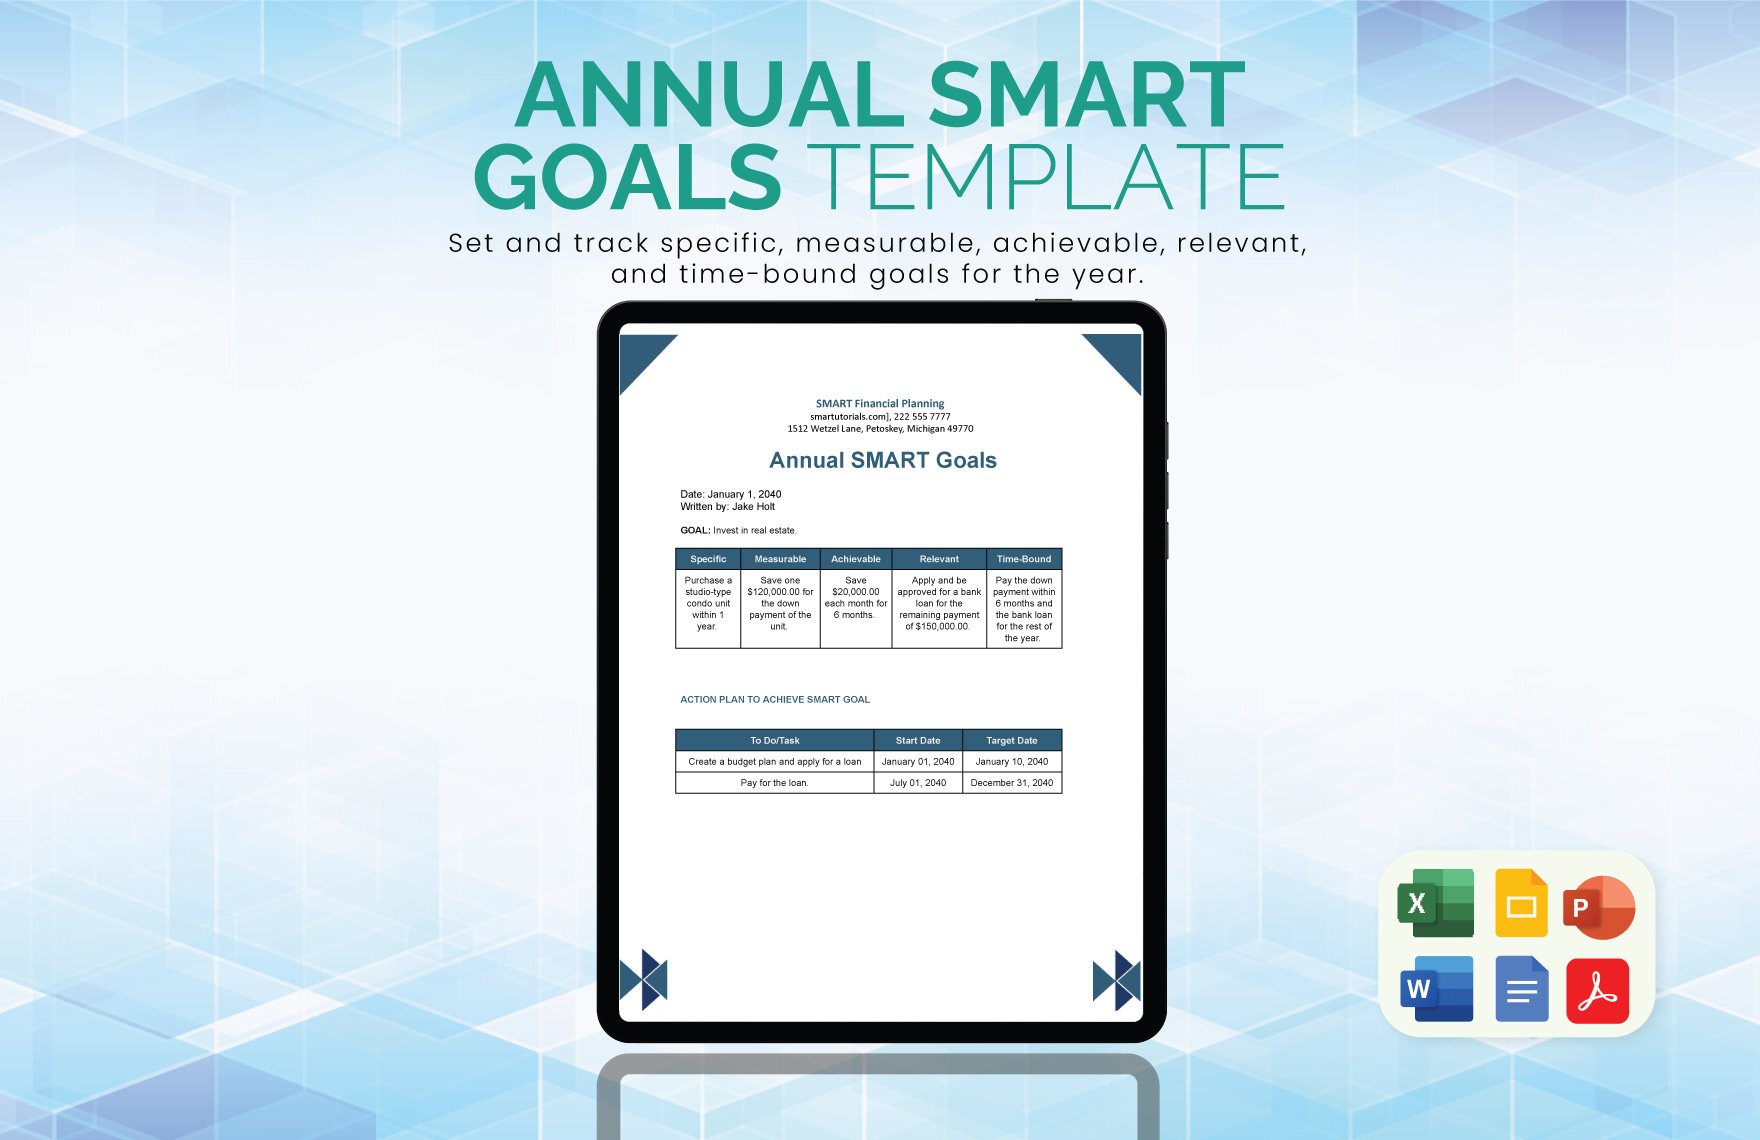 Annual Smart Goals Template in Word, Google Docs, Excel, PDF, PowerPoint, Google Slides